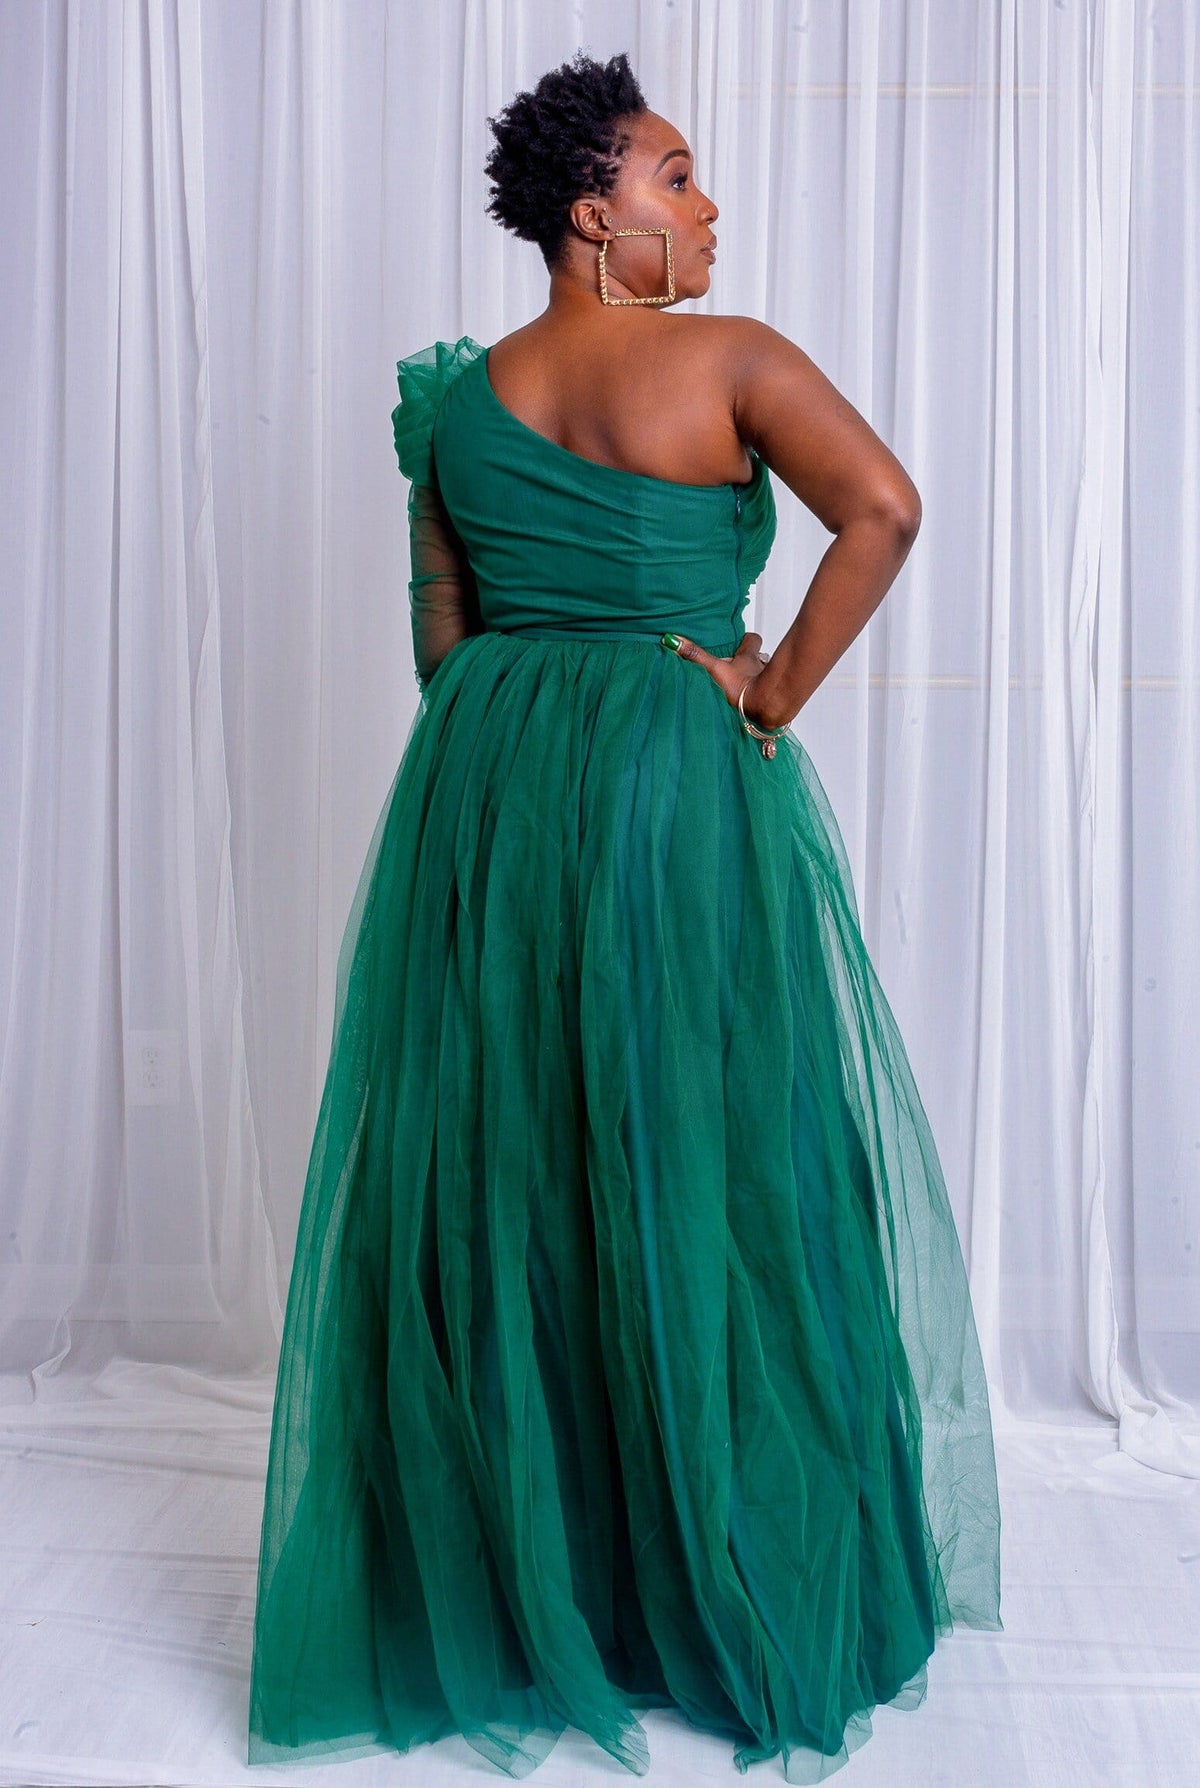 One Shoulder Tulle Dress (Green) small to 3XL